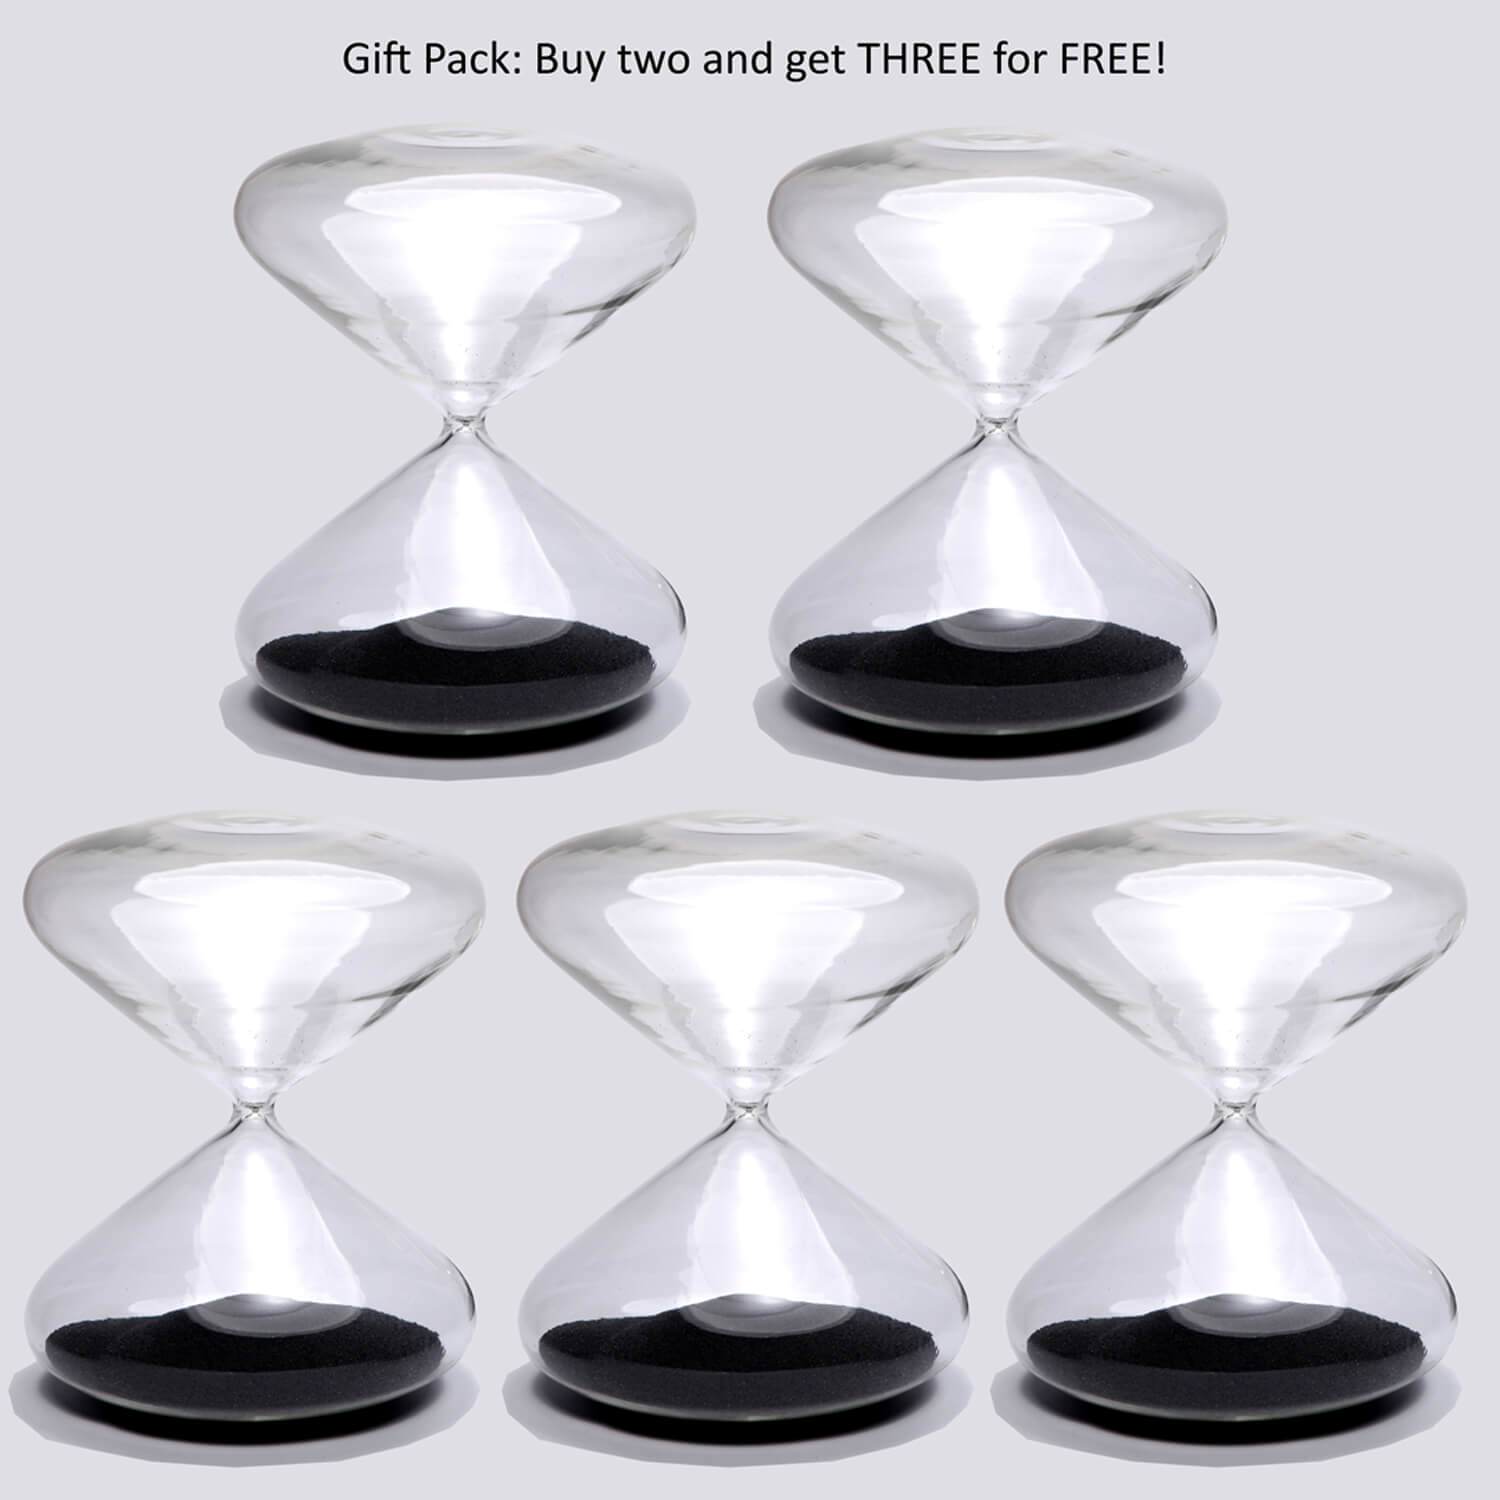 *BLACK FRIDAY ONLY* Esington Glass 25 Minute Timer: Buy TWO Get THREE Free!